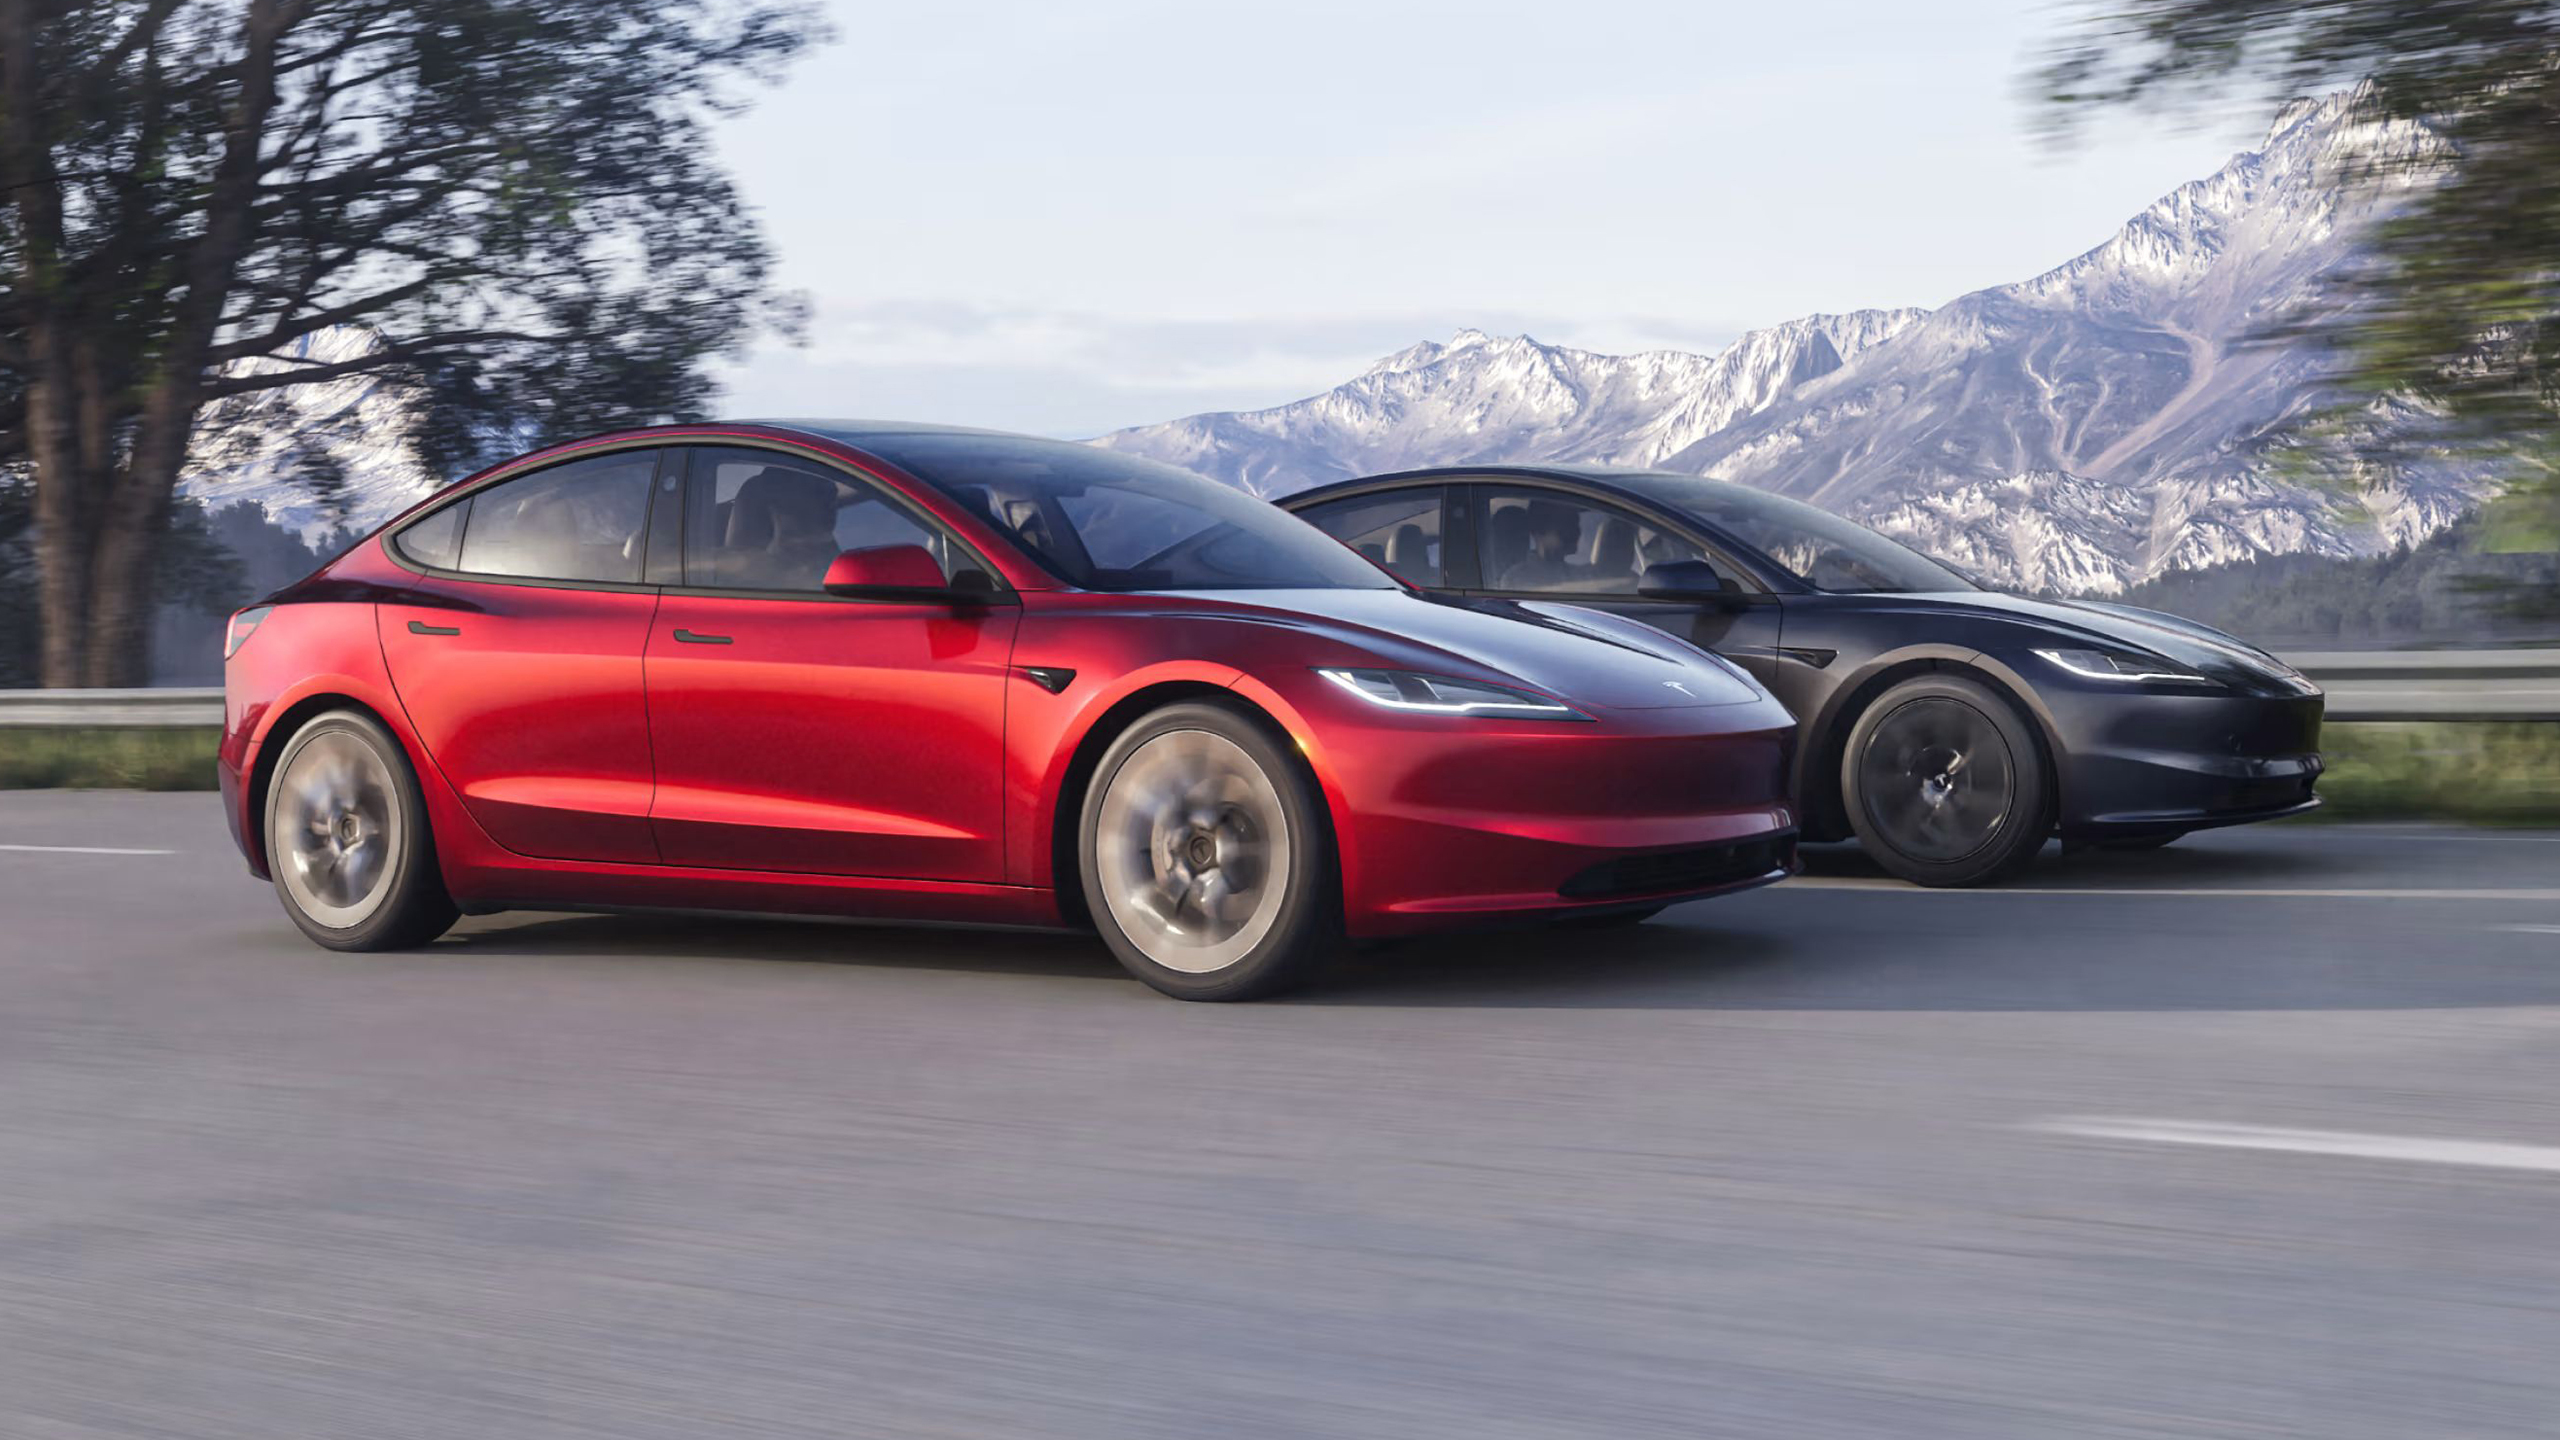 Tesla's Model 3 Is Here, and It's Much More Than an Electric Car